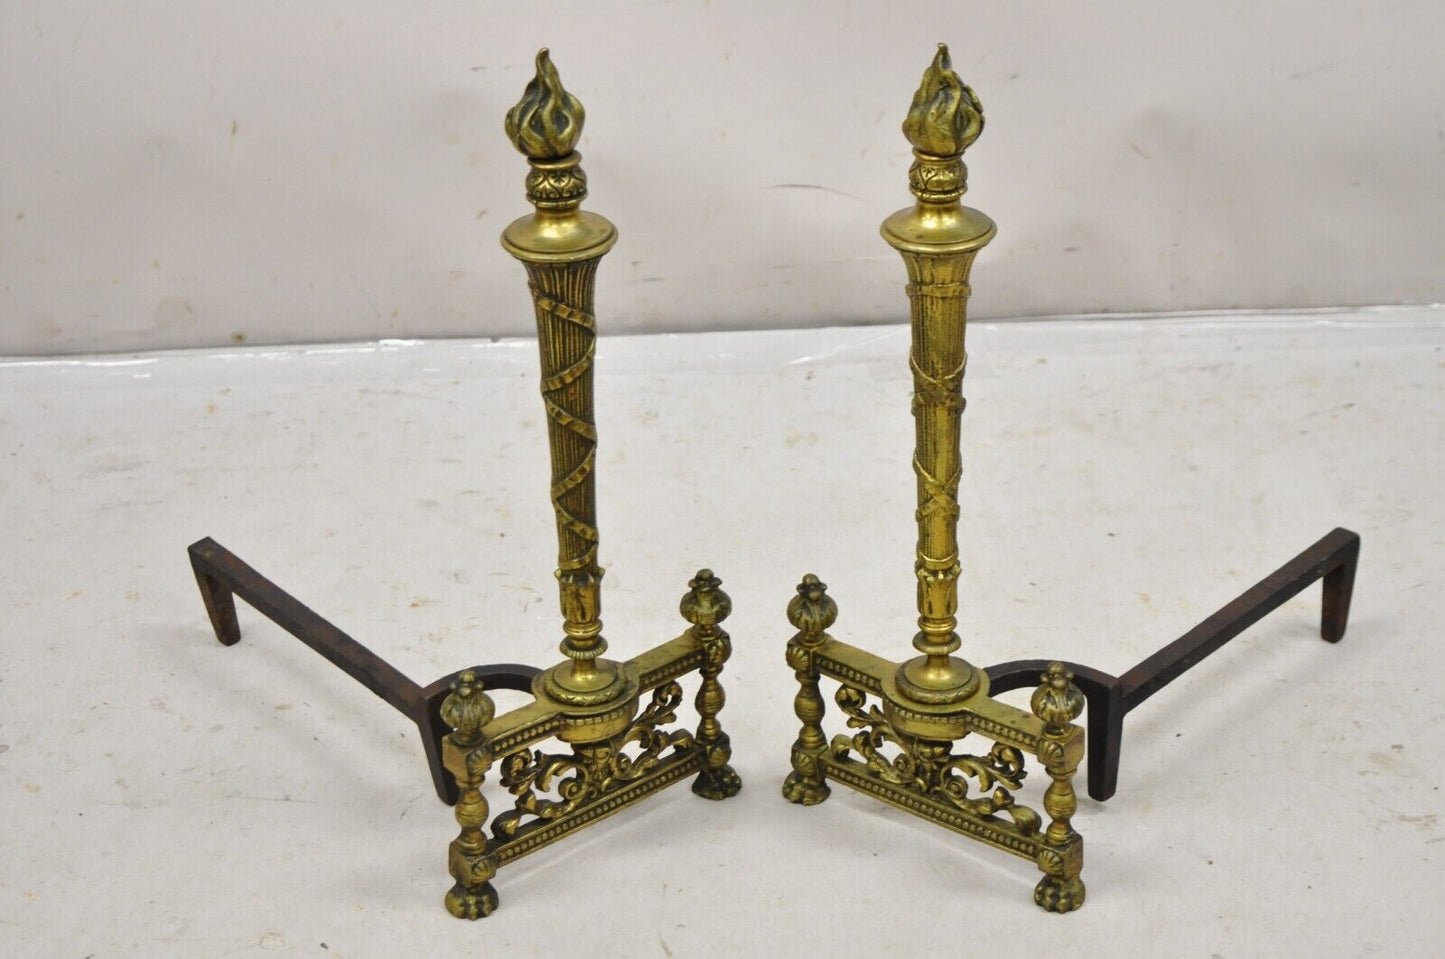 Antique French Empire Style Flame Finial Brass and Cast Iron Andirons - a Pair